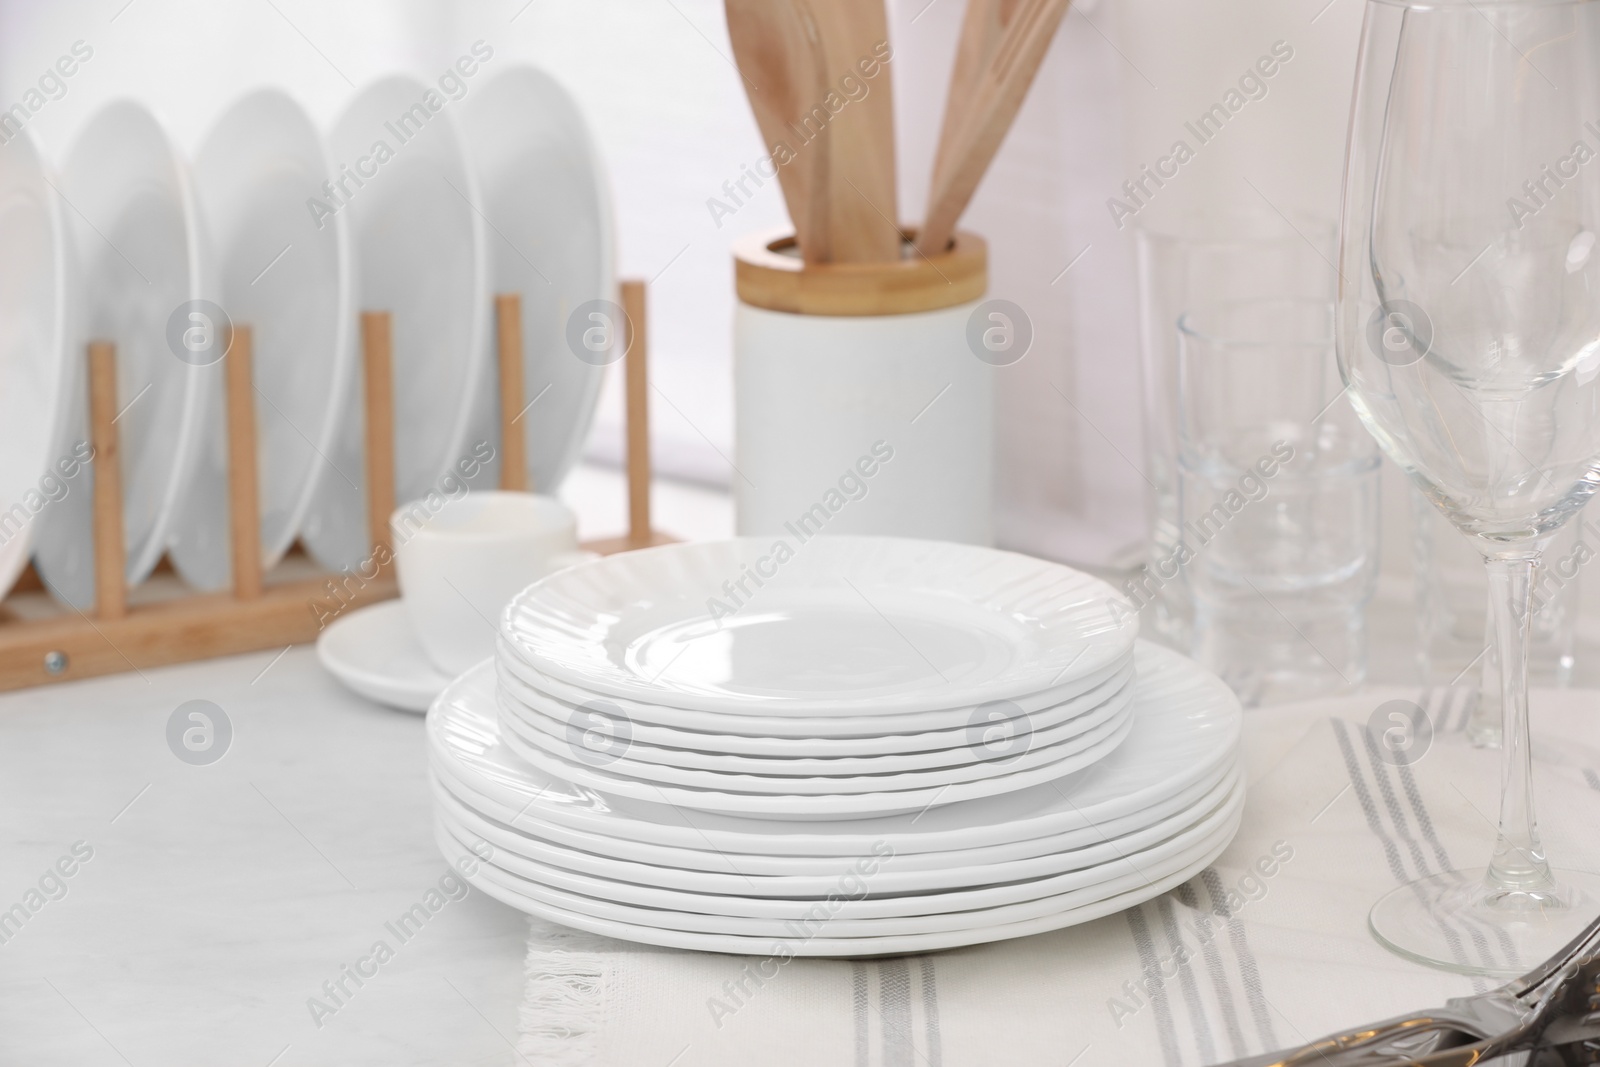 Photo of Clean dishes and towel on table in kitchen